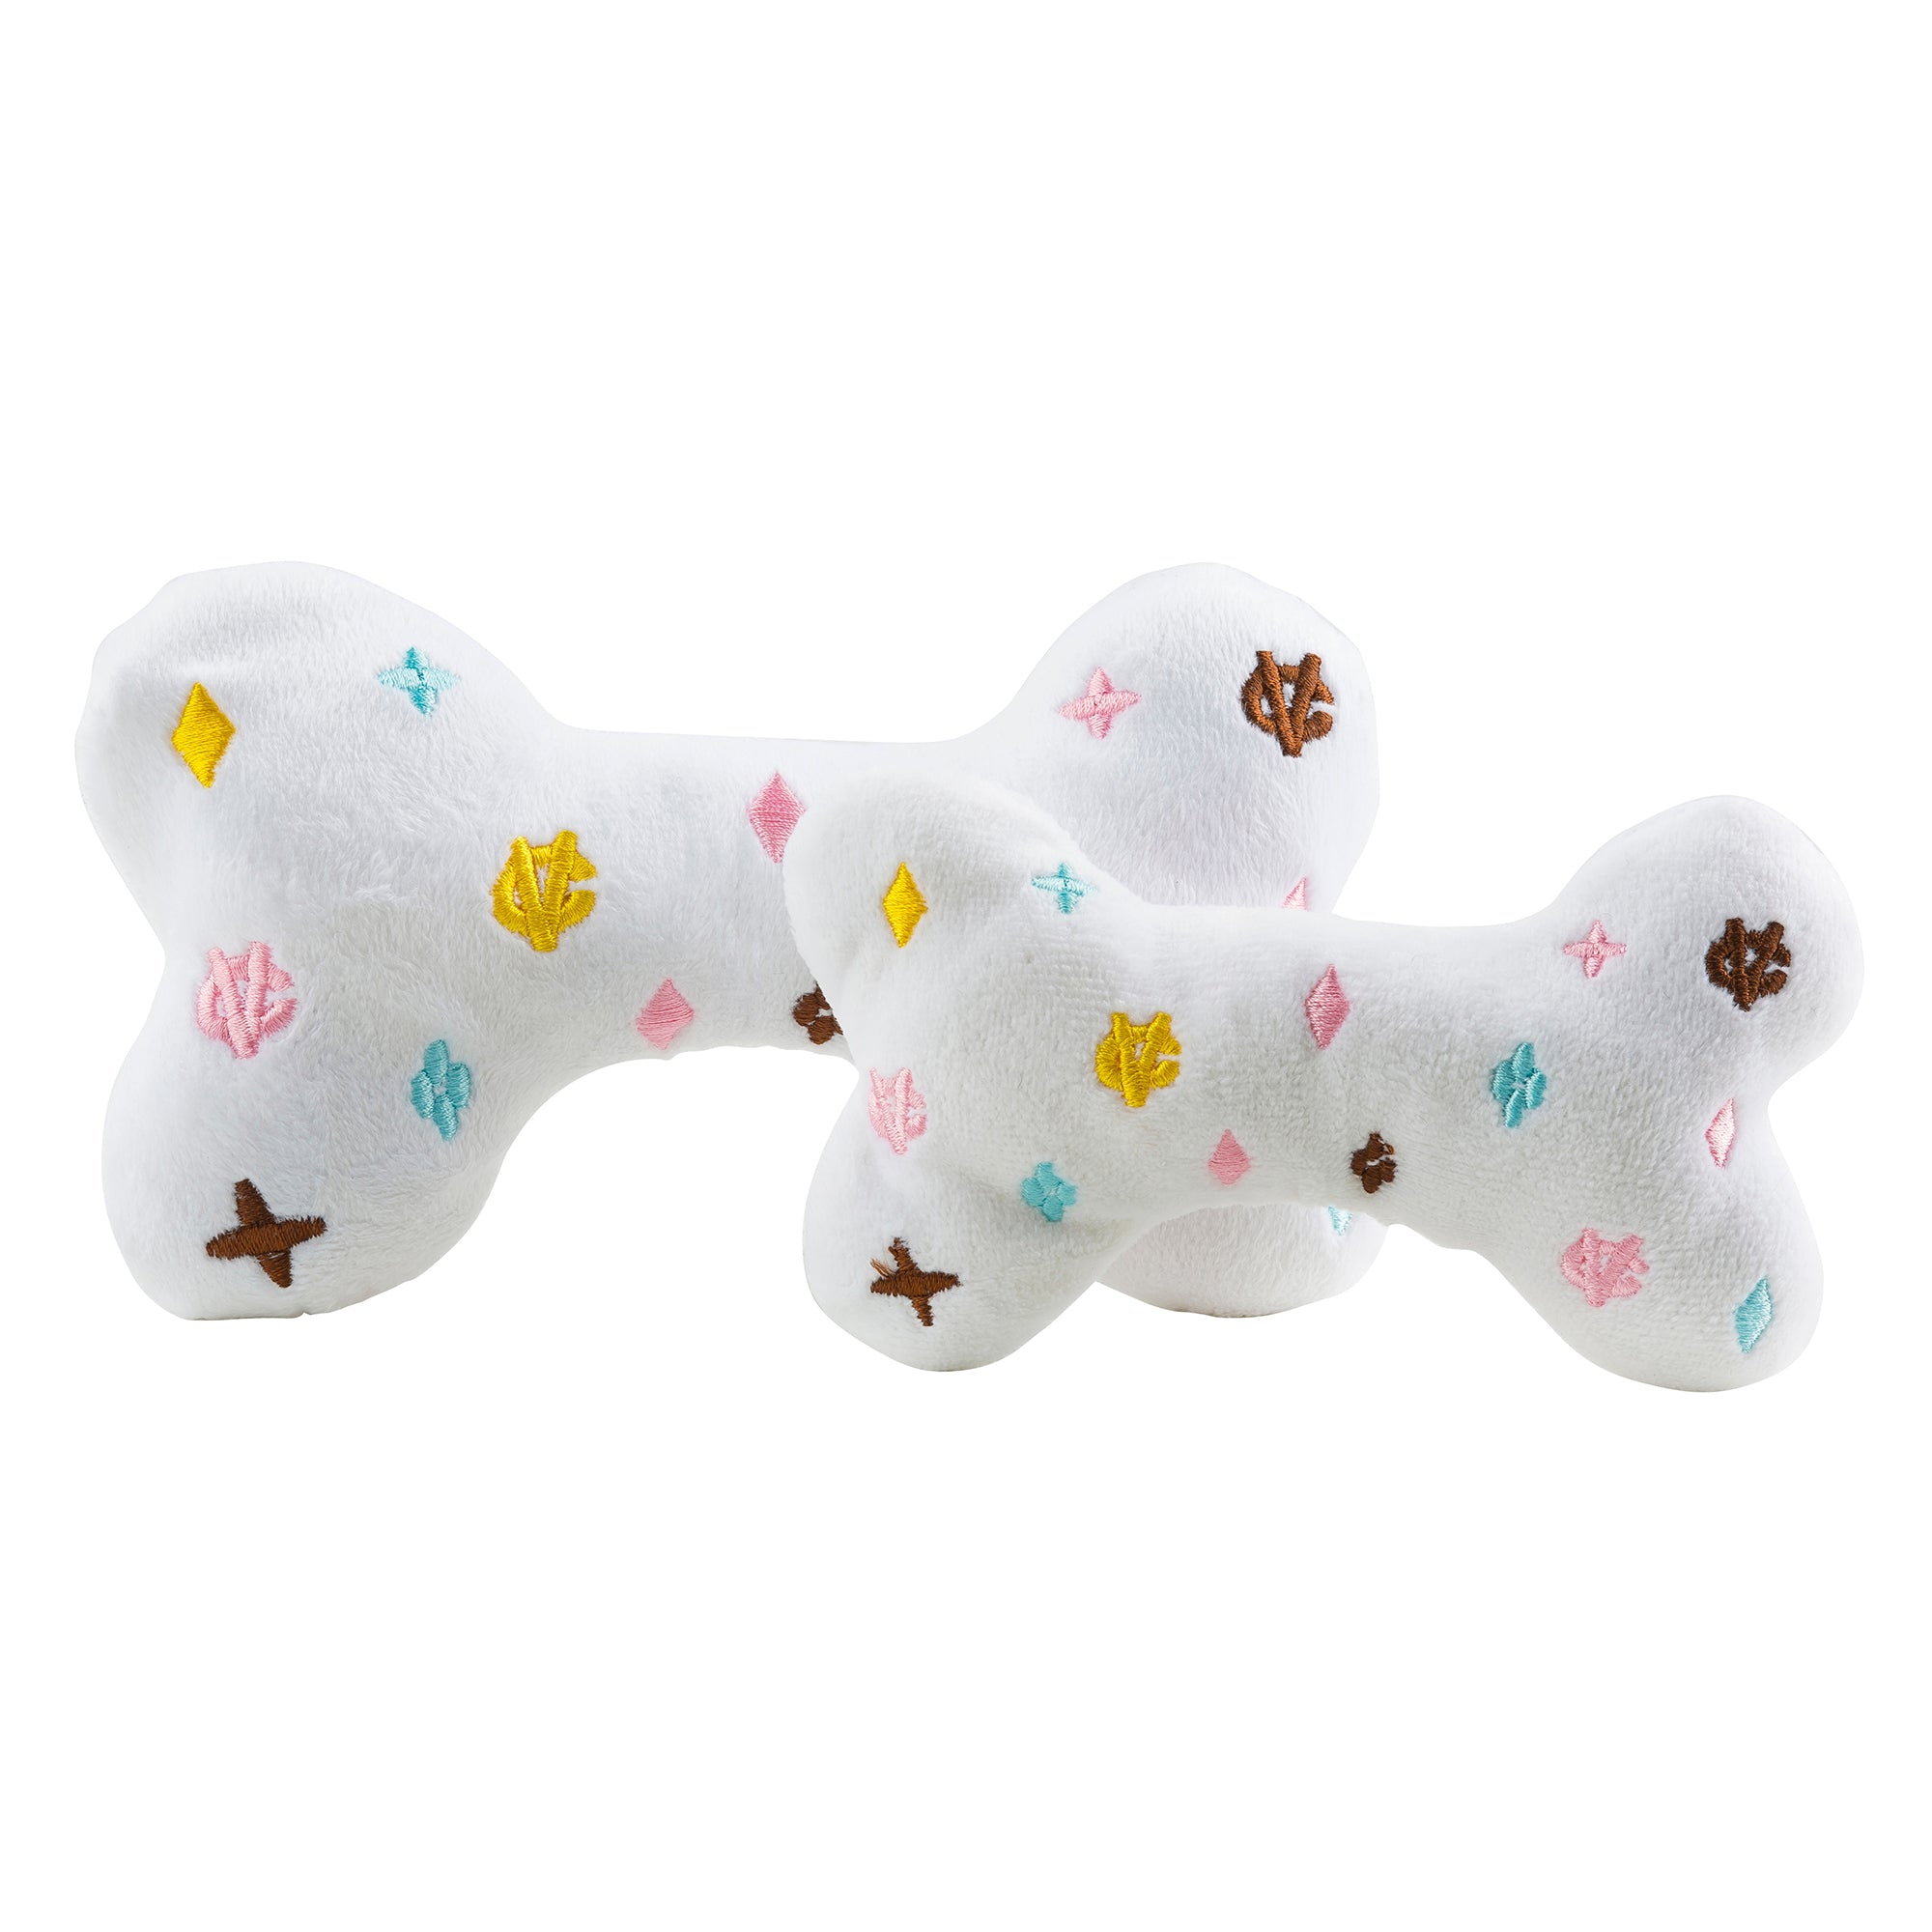 Haute Diggity Dog Chewy Vuiton White Collection – Soft Plush